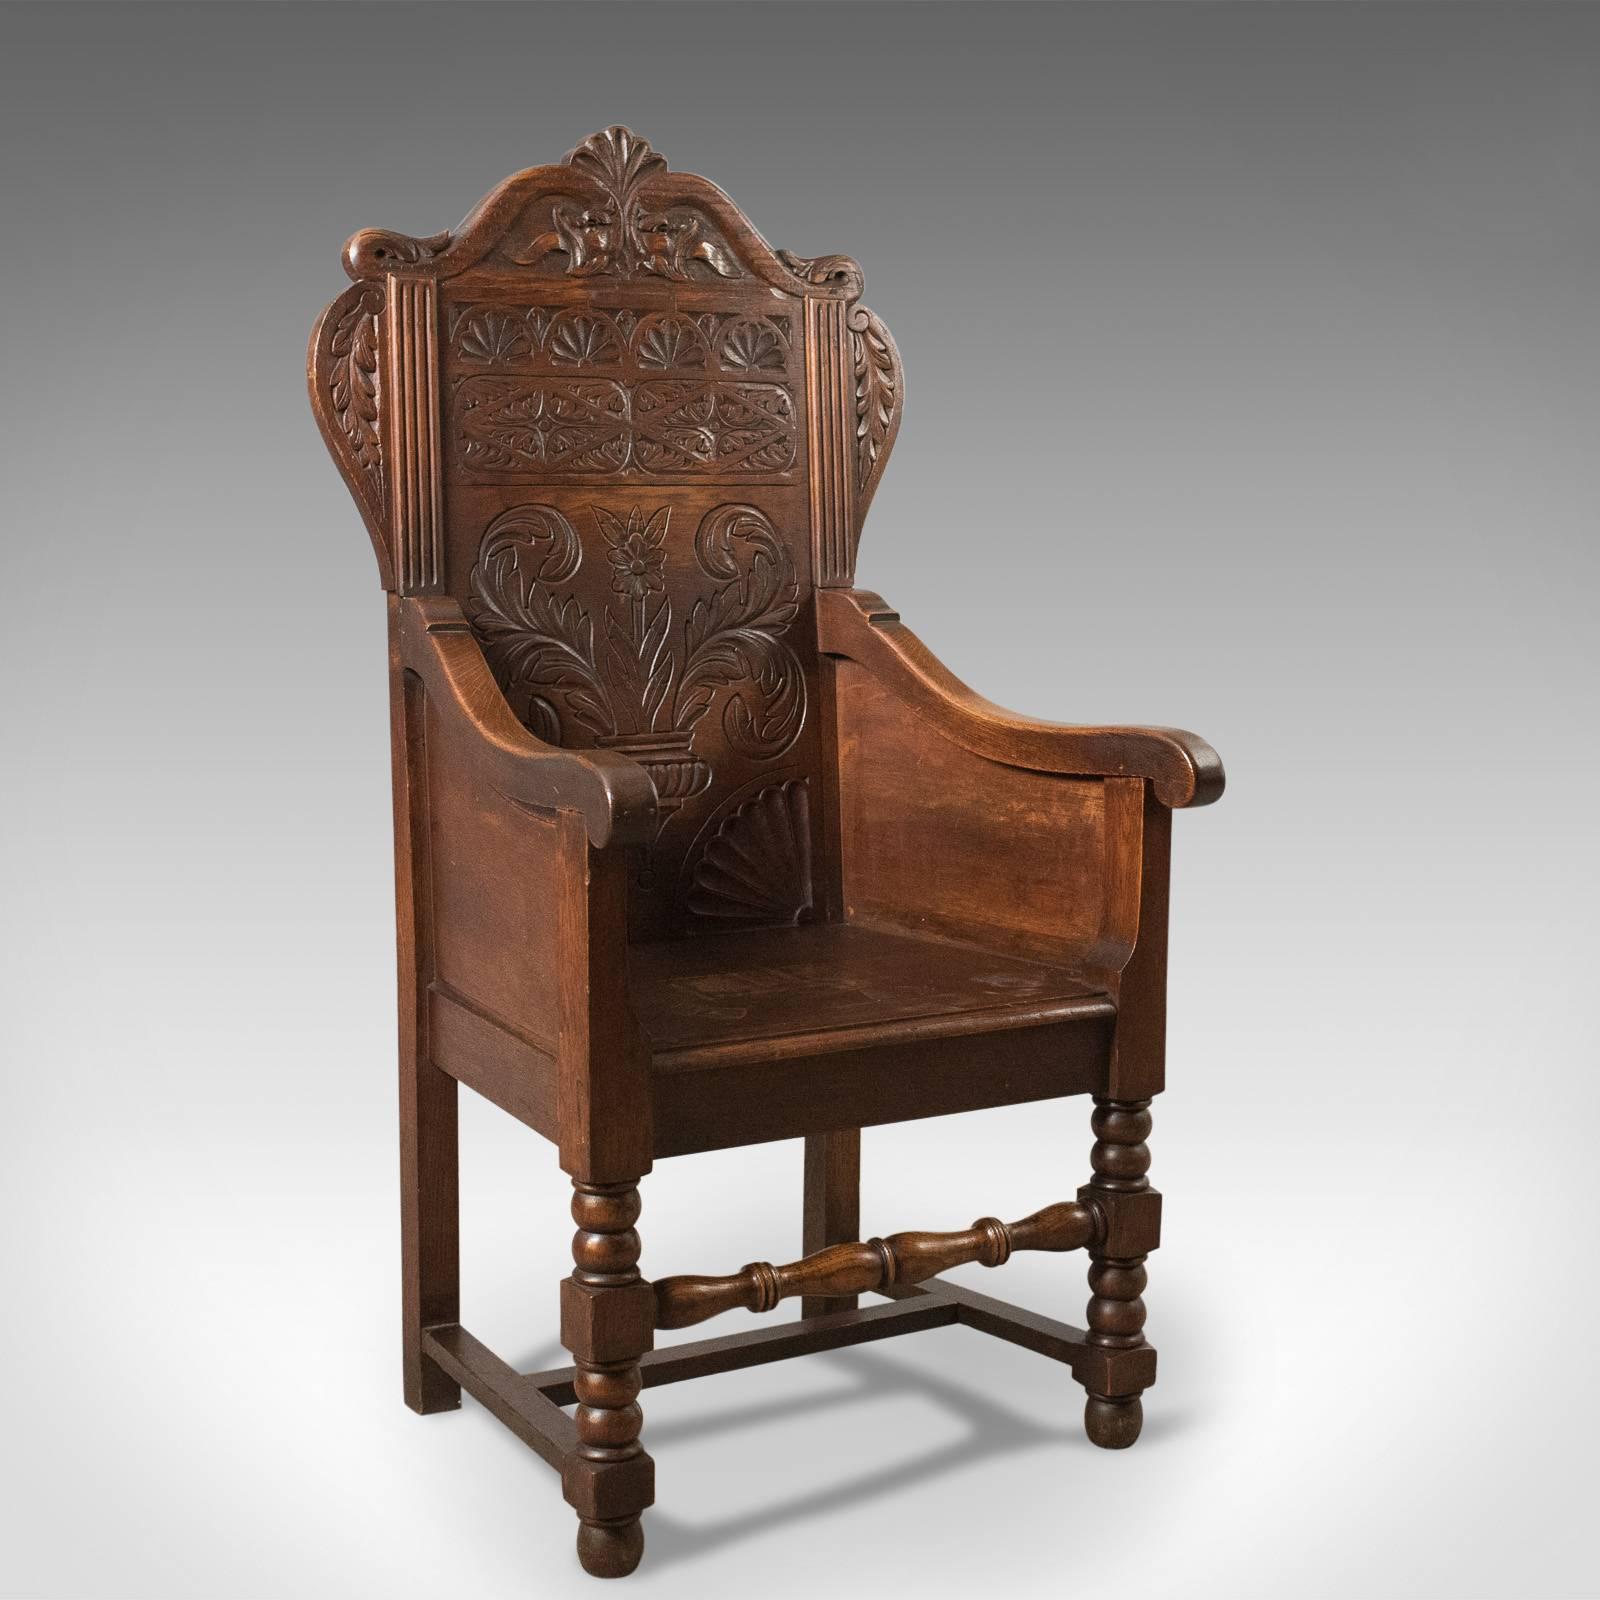 This is an antique pair of Baronial hall chairs. These English oak armchairs date to the late Victorian period, circa 1900.

A striking pair of carved oak chairs of substantial size and presence
Raised on box and ball front legs and square